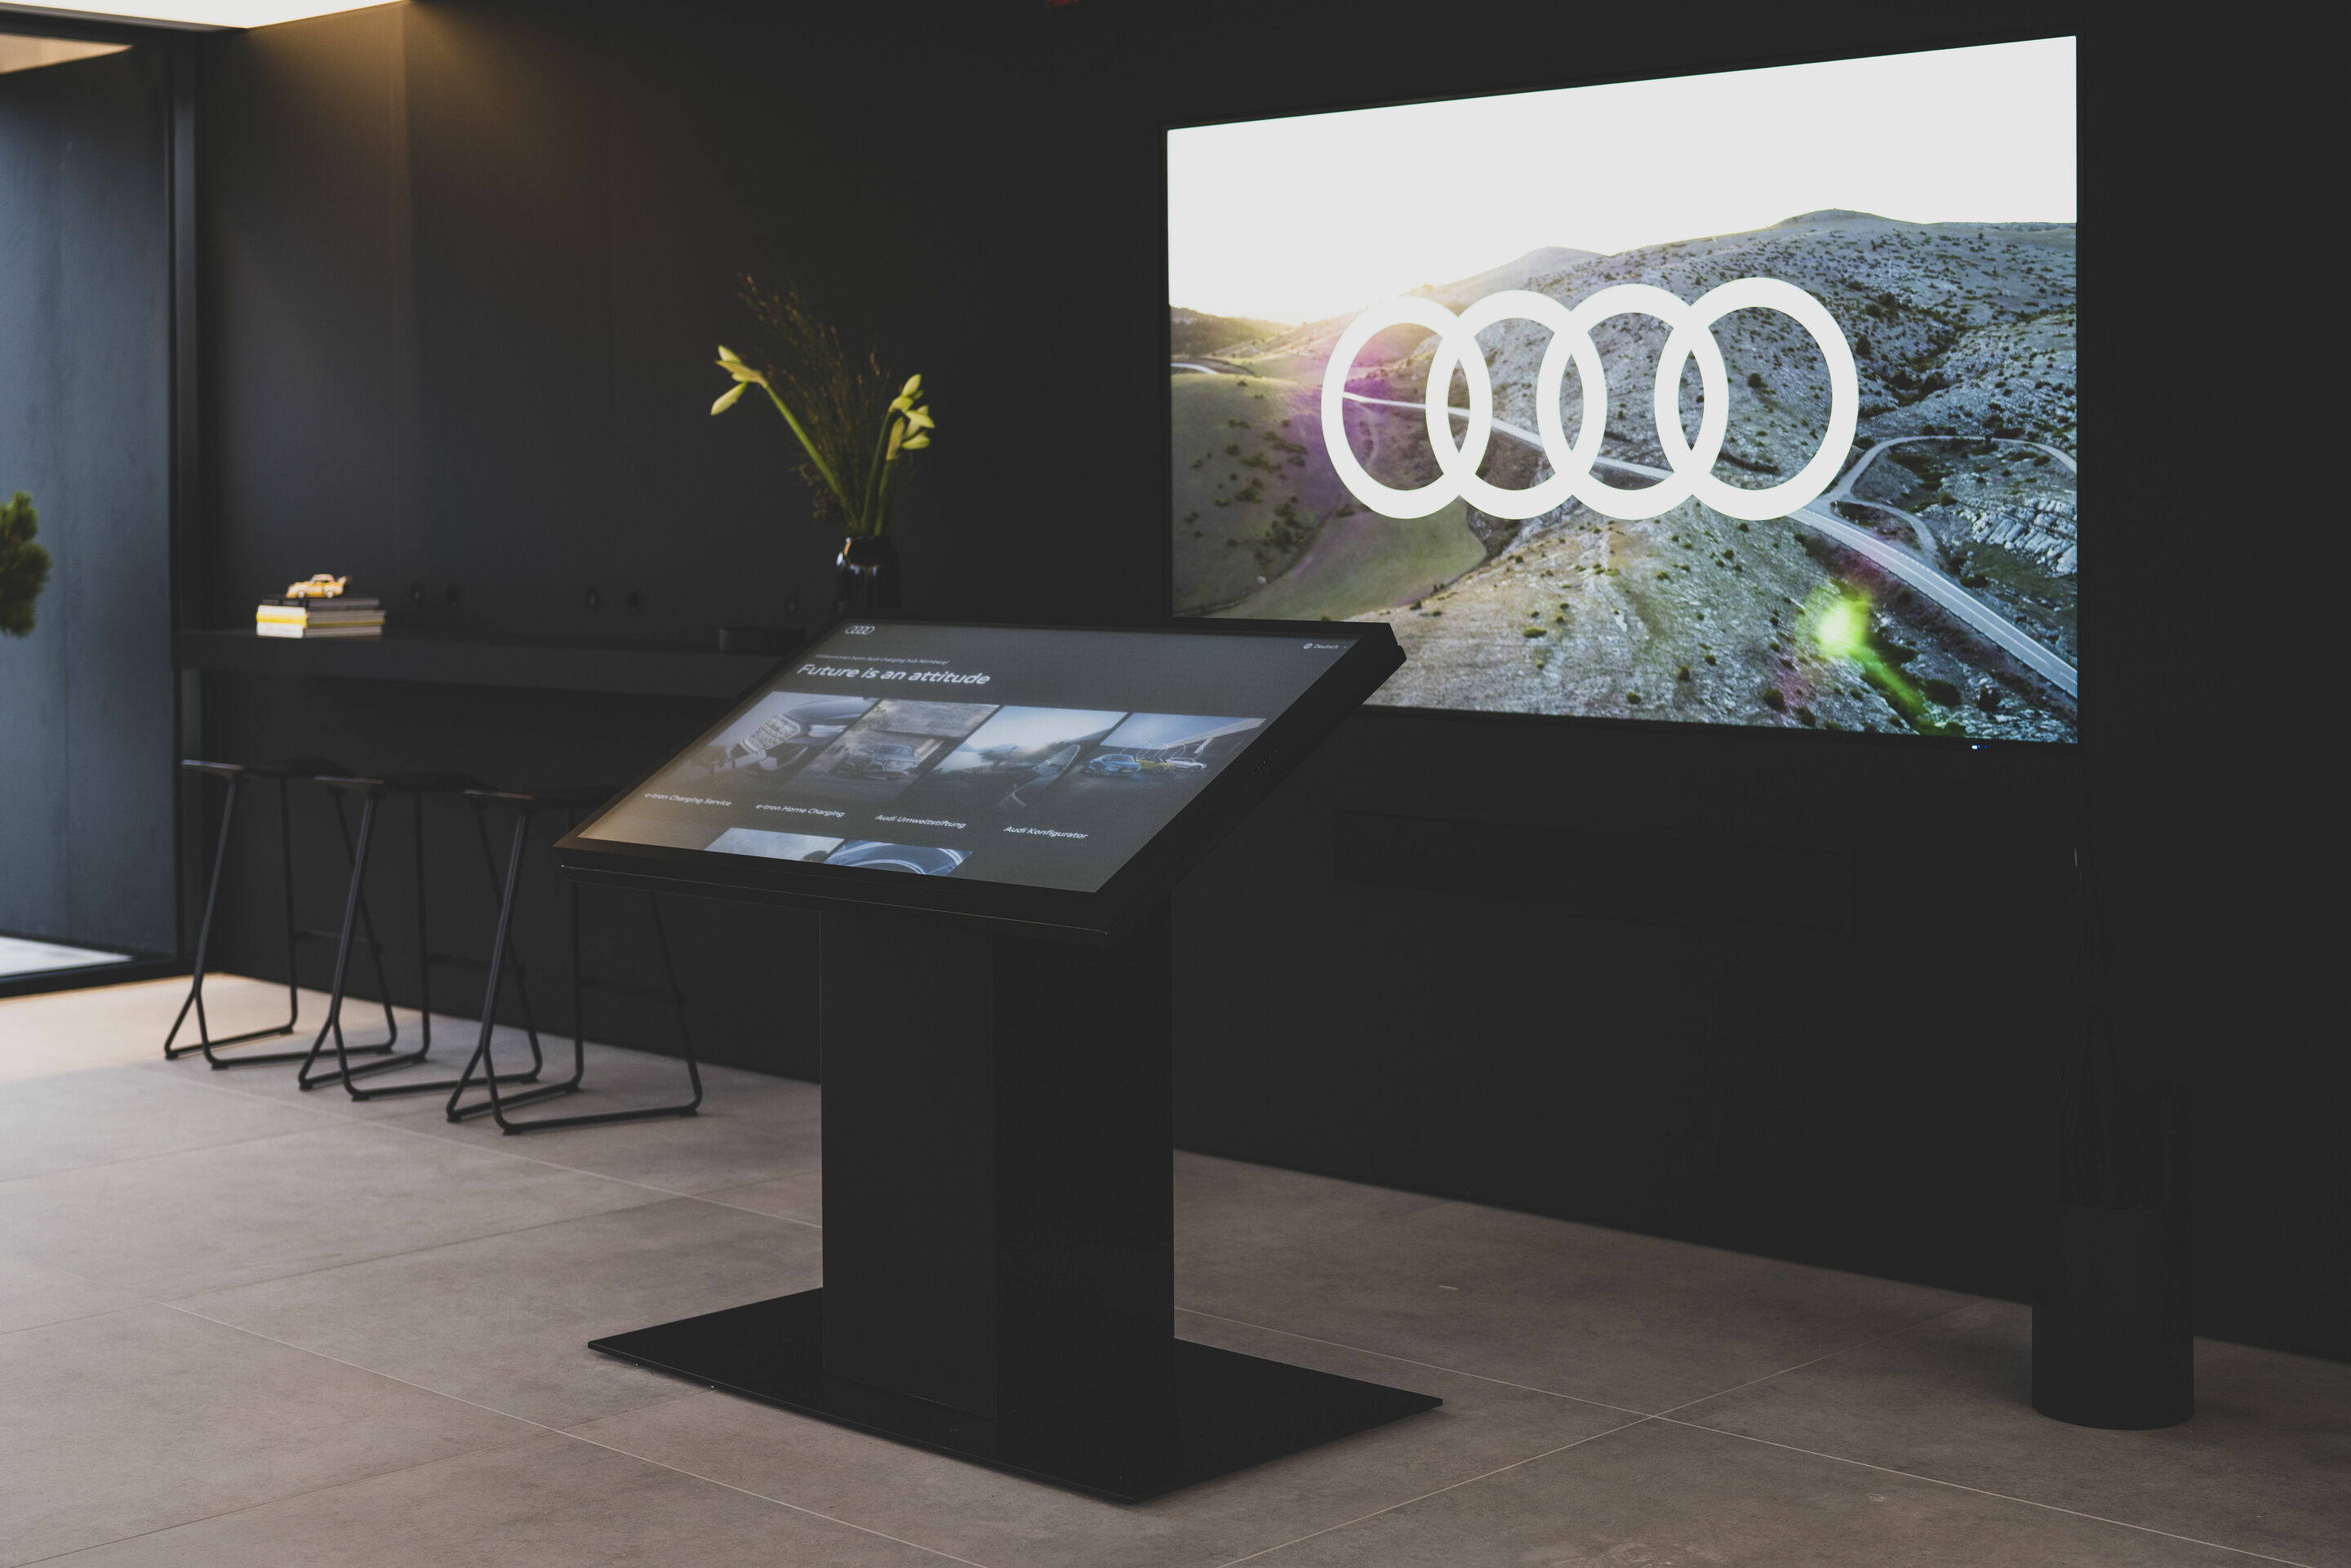 World first: start of the Audi charging hub as an urban quick-charing concept